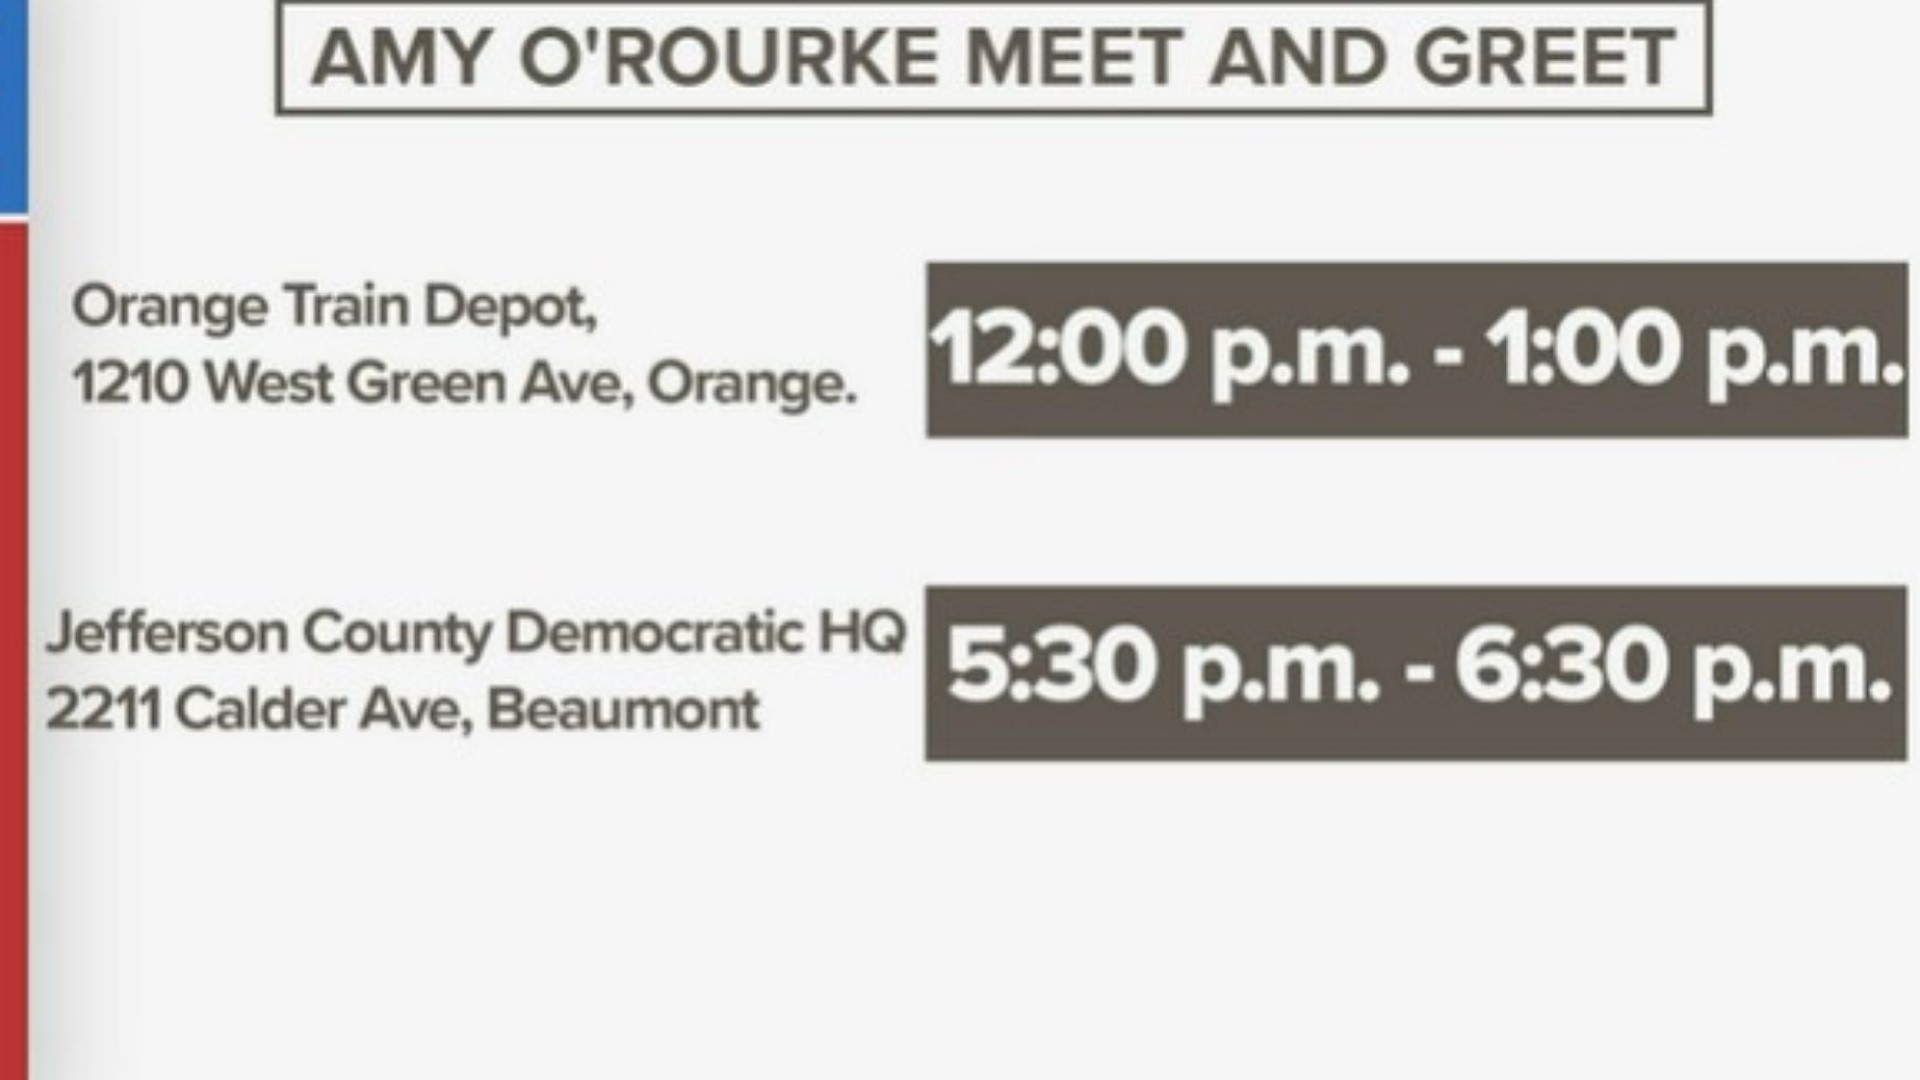 Amy O'Rourke will be in Orange on Wednesday, October 19, 2022 at noon at the old train depot at 1210 Green Avenue according to the campaign.